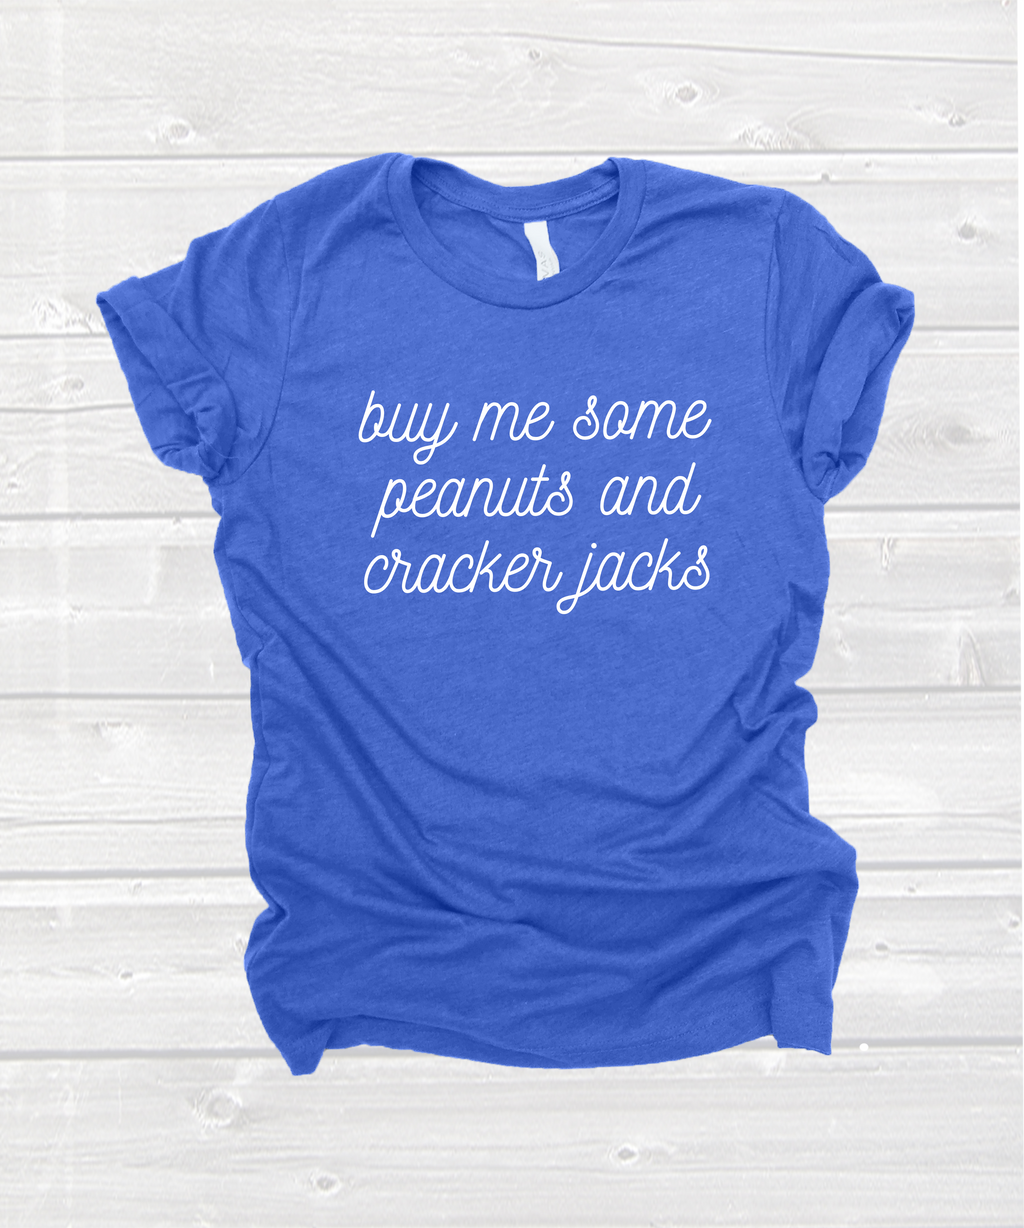 "buy me some peanuts and cracker jacks" tee in heather blue